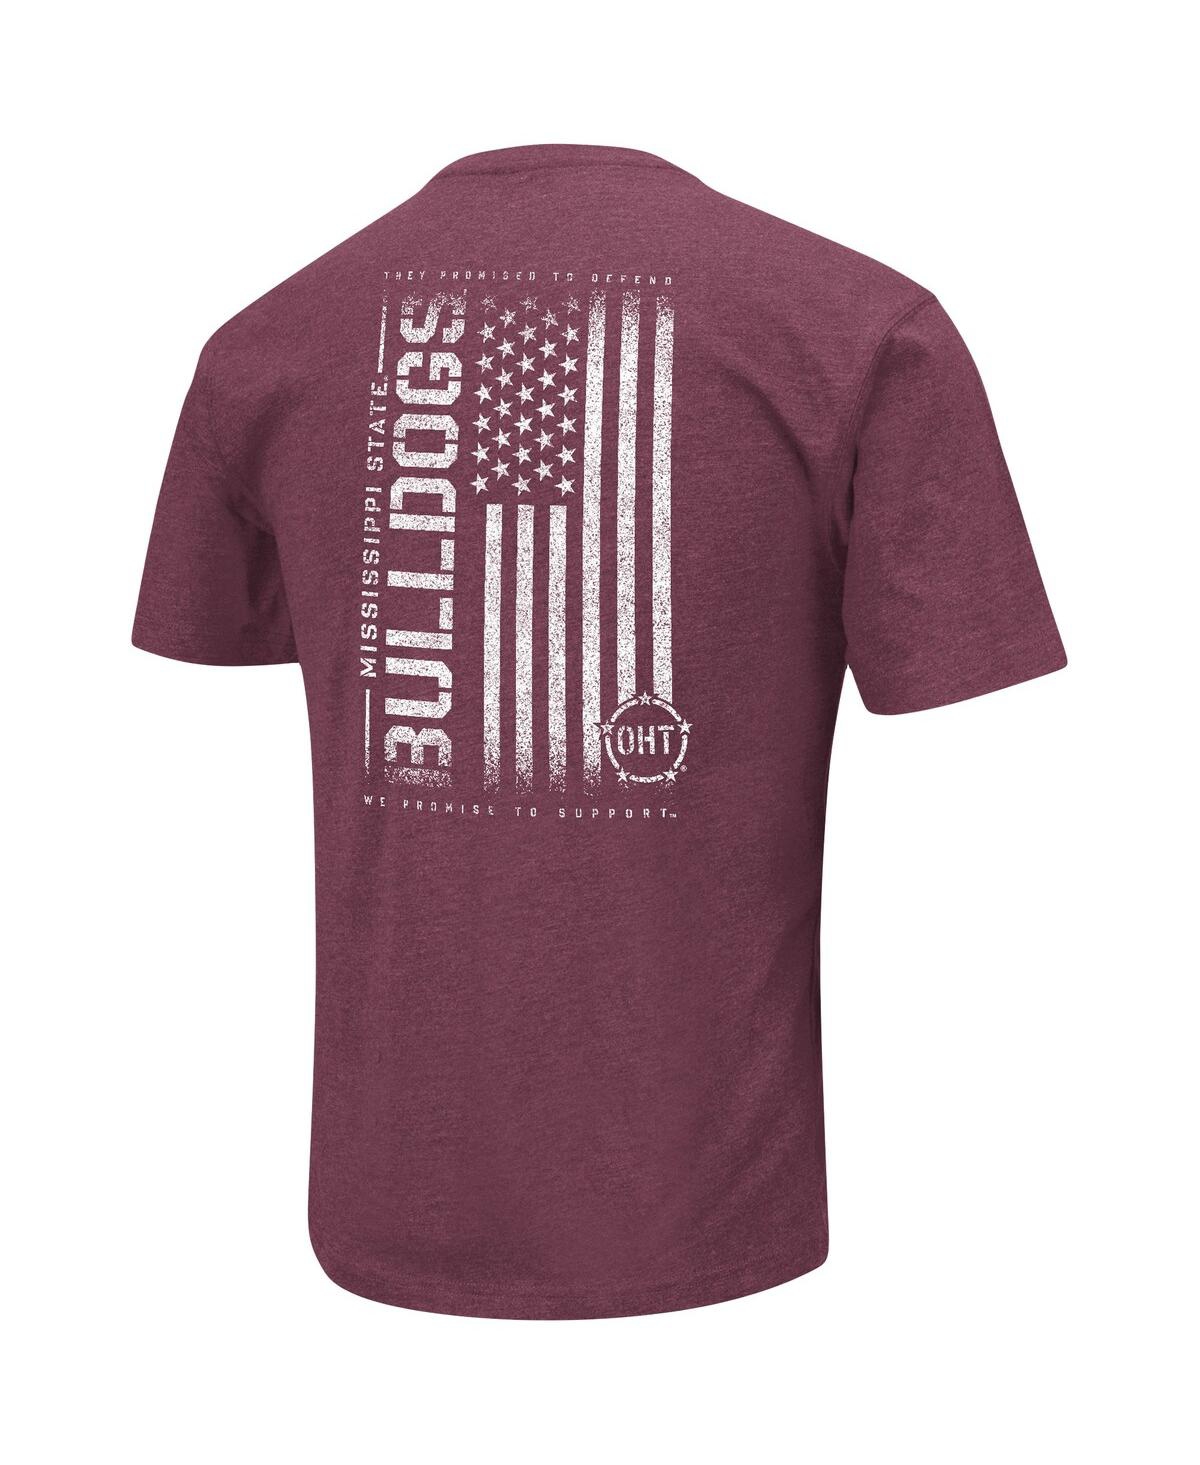 Shop Colosseum Men's  Heather Maroon Mississippi State Bulldogs Oht Military-inspired Appreciation Flag 2.